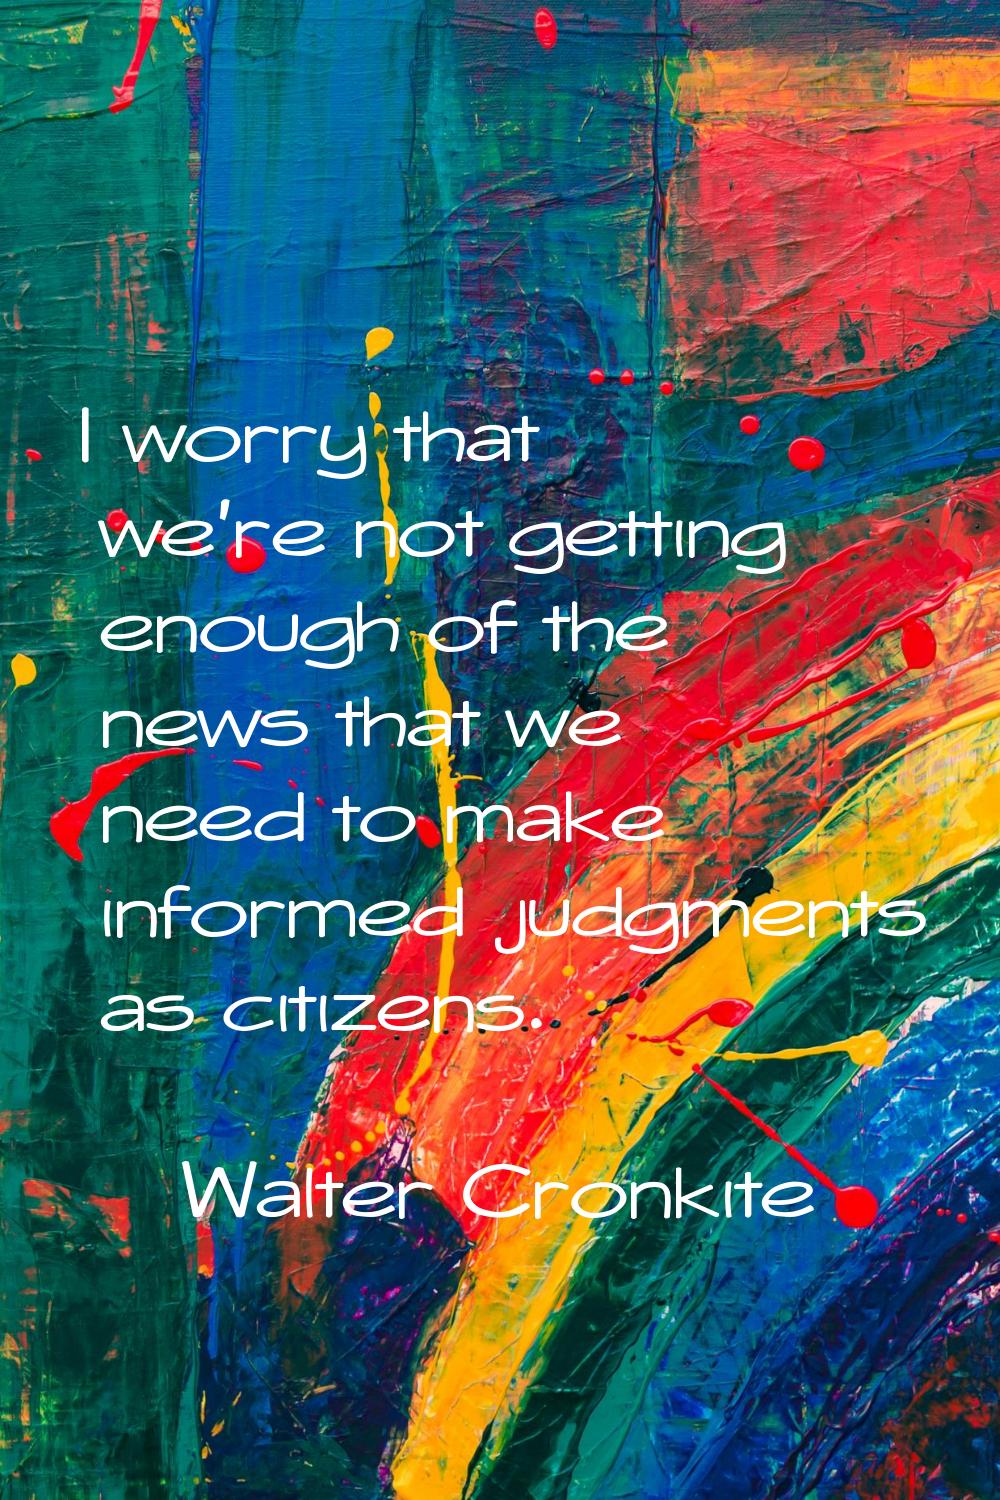 I worry that we're not getting enough of the news that we need to make informed judgments as citize